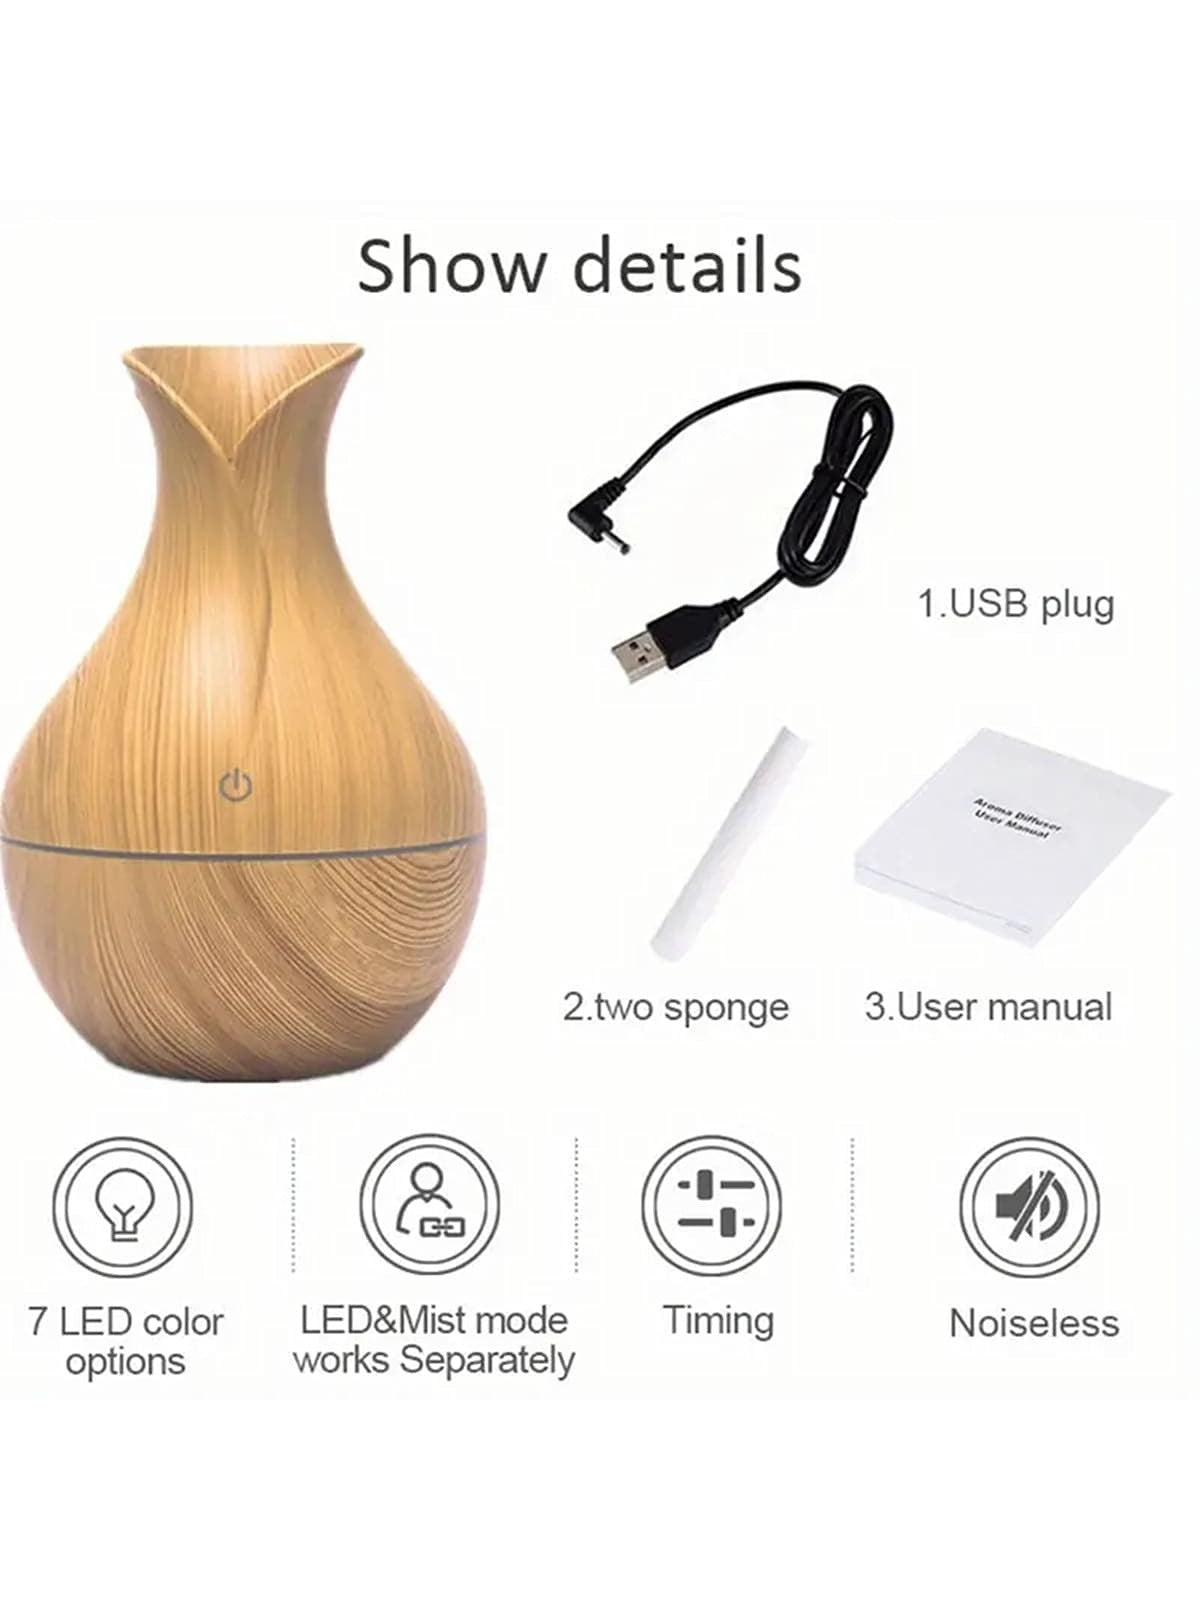 1pc Usb Wood Grain Flower Vase Shaped Humidifier With 7-color Led Light & Aroma Diffuser Function For Home, Office, Car Decoration-light wood grain-2